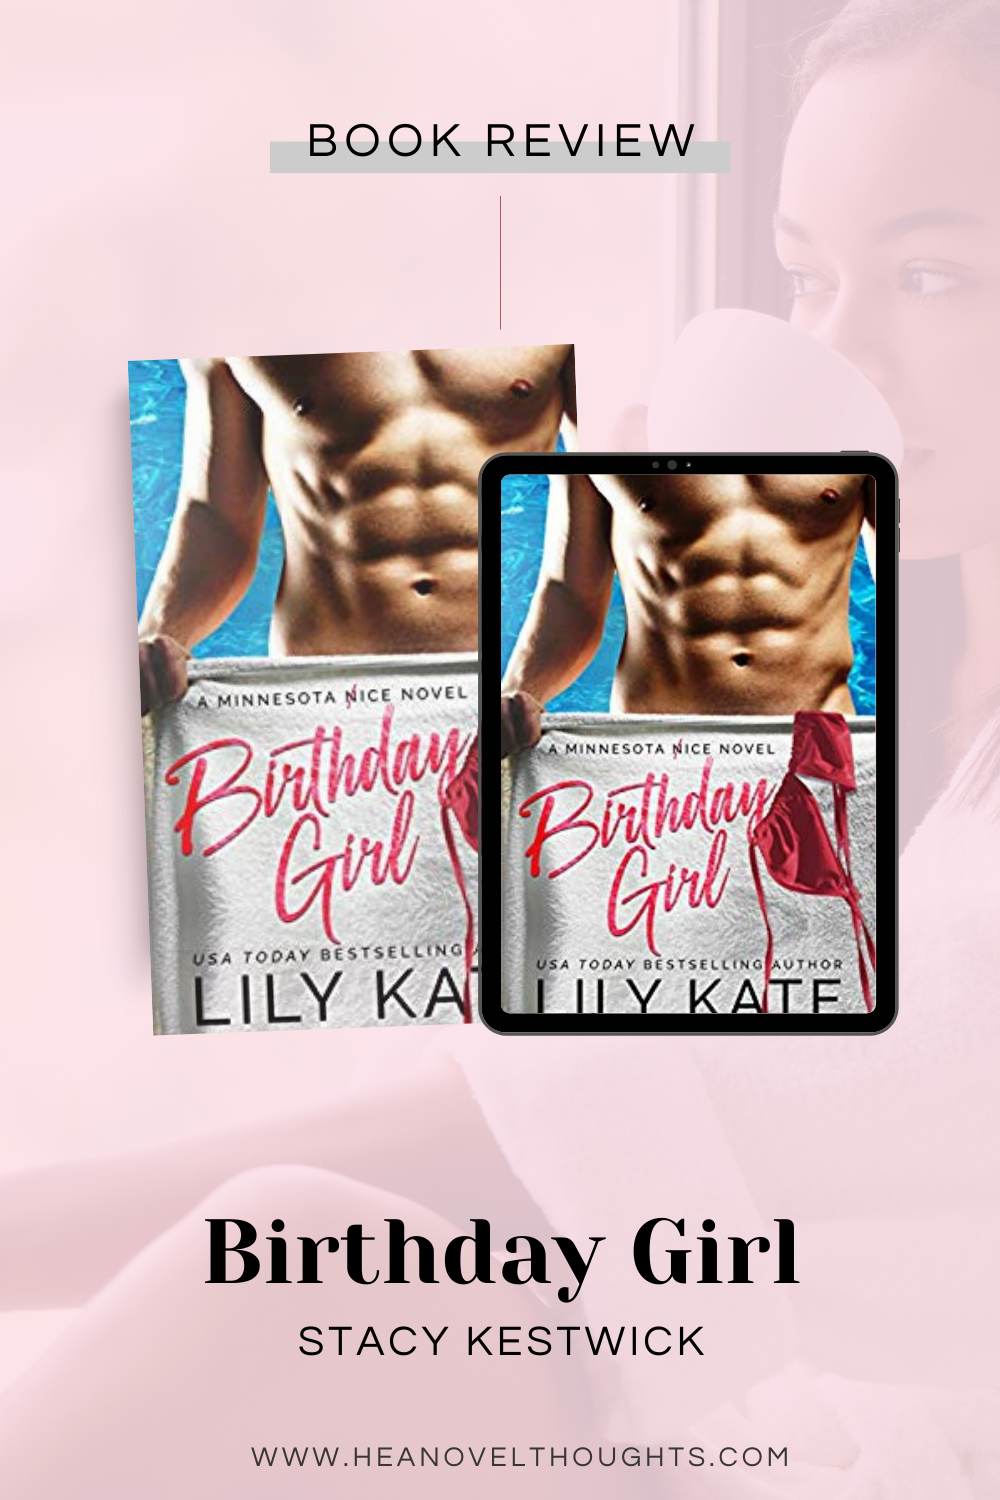 Birthday Girl by Lily Kate